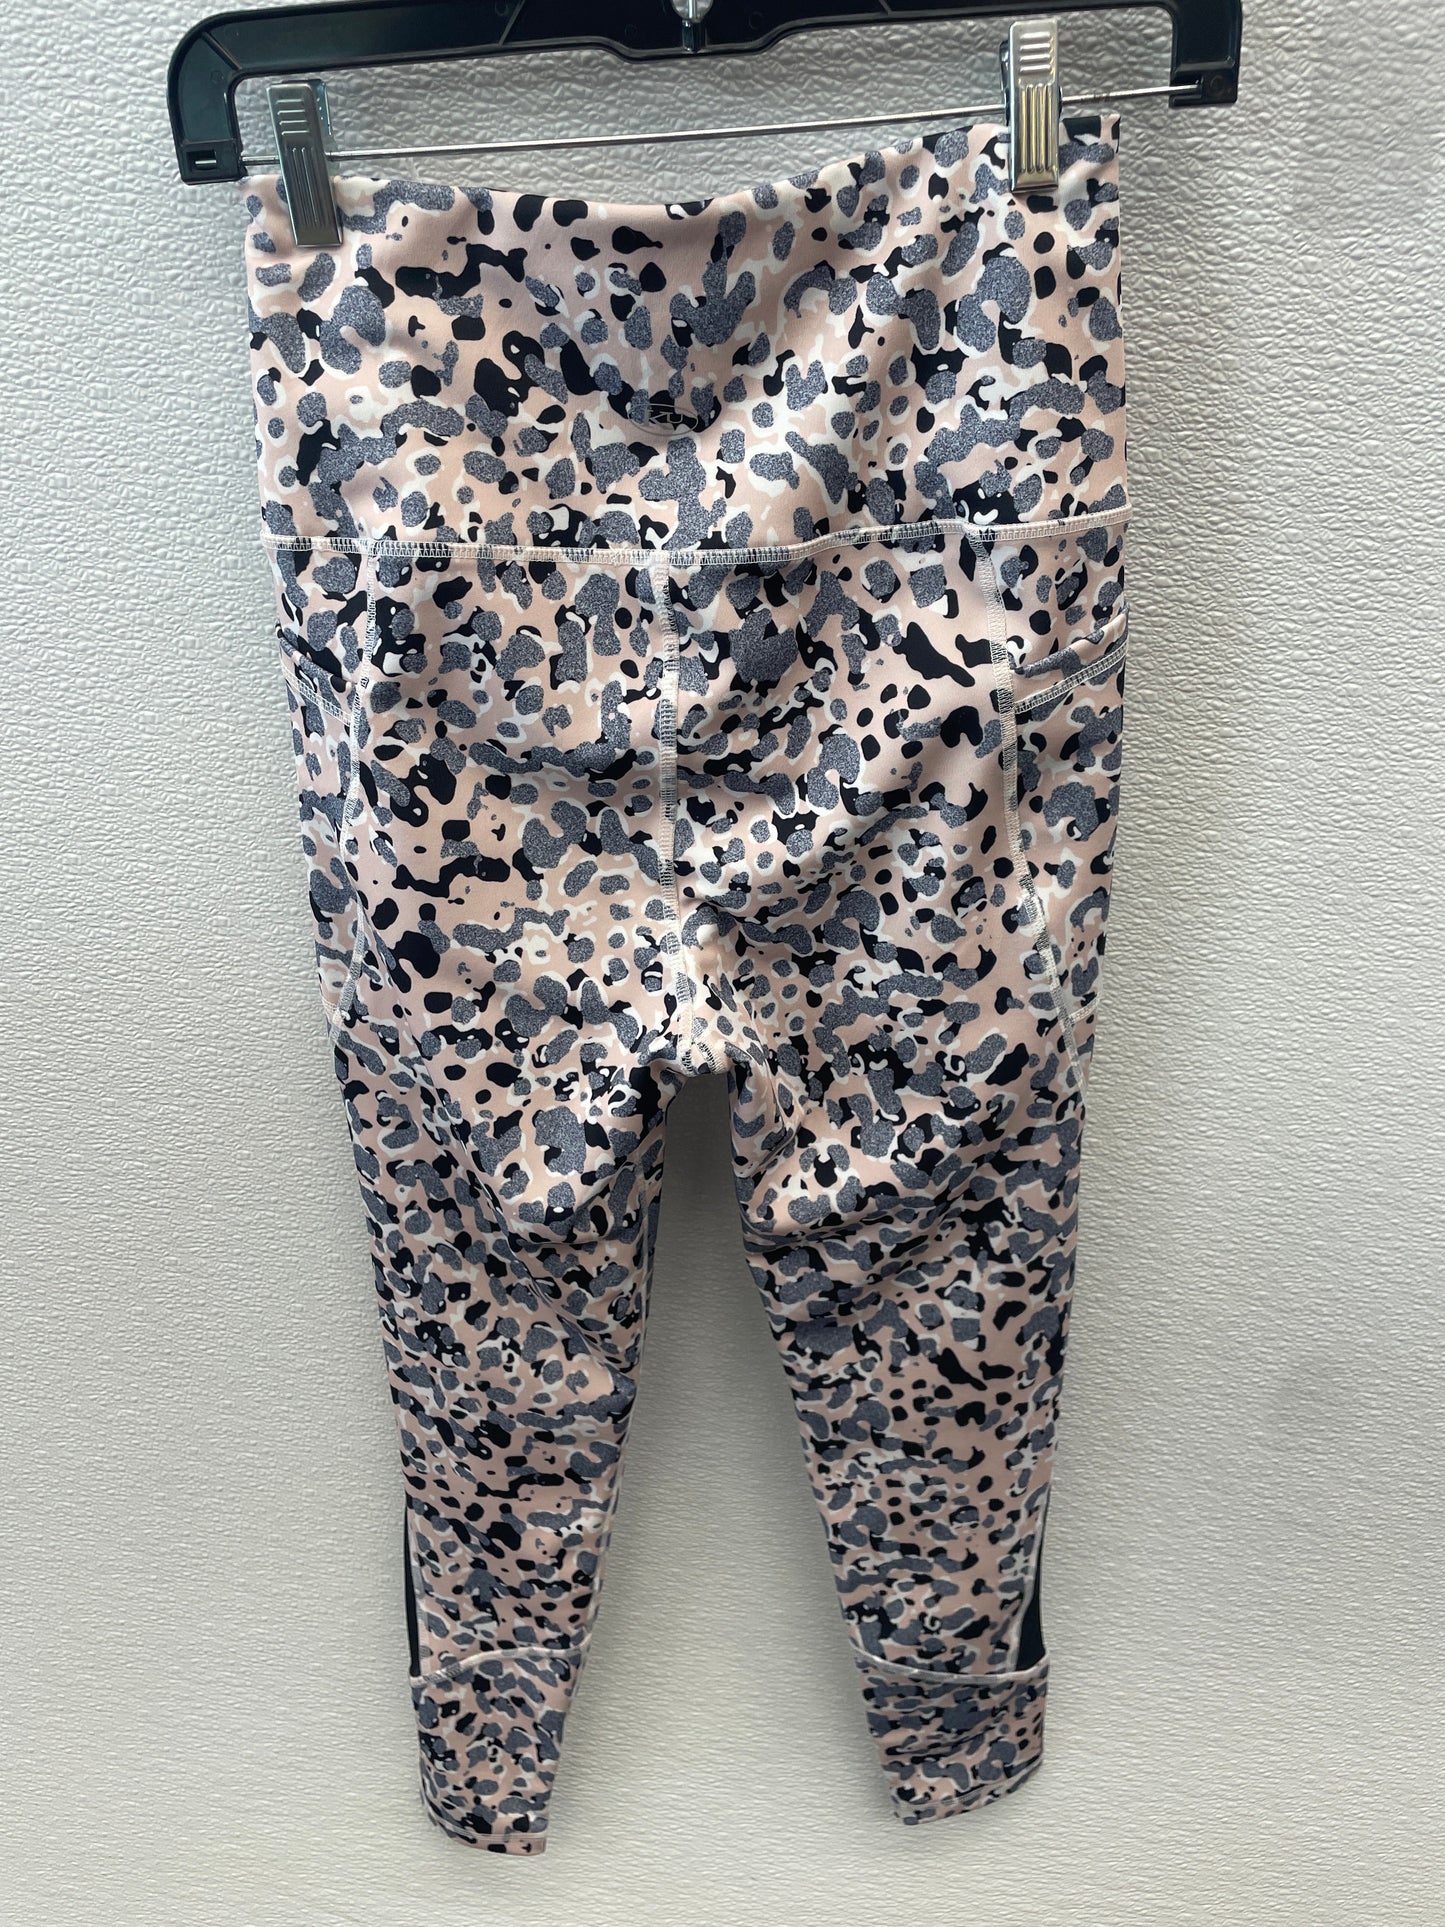 Athletic Leggings By Kay Unger  Size: S